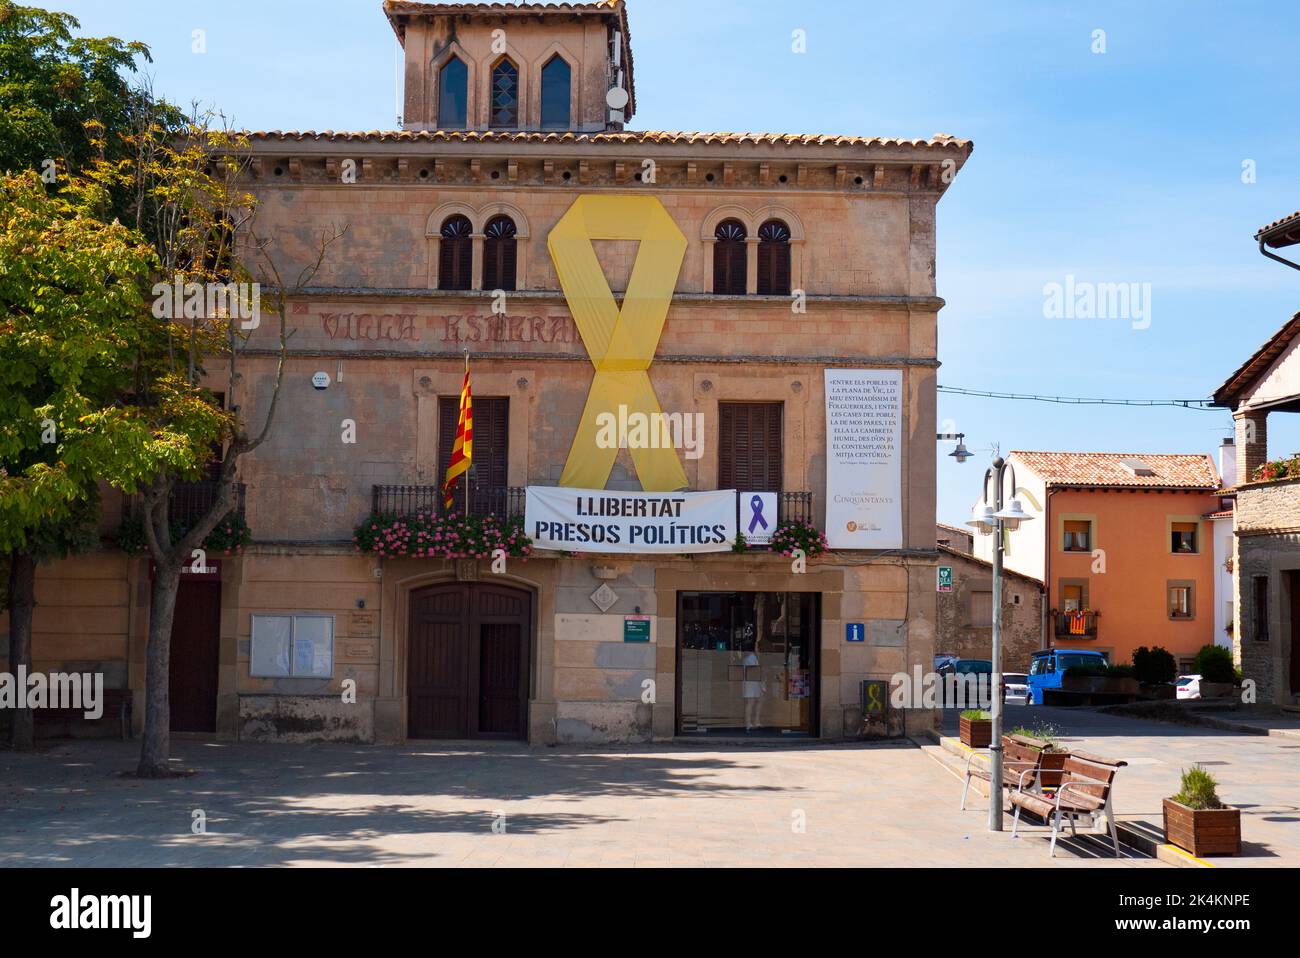 The Catalan flag, symbol of independence is displayed at Folgueroles, Catalonia, Spain Stock Photo